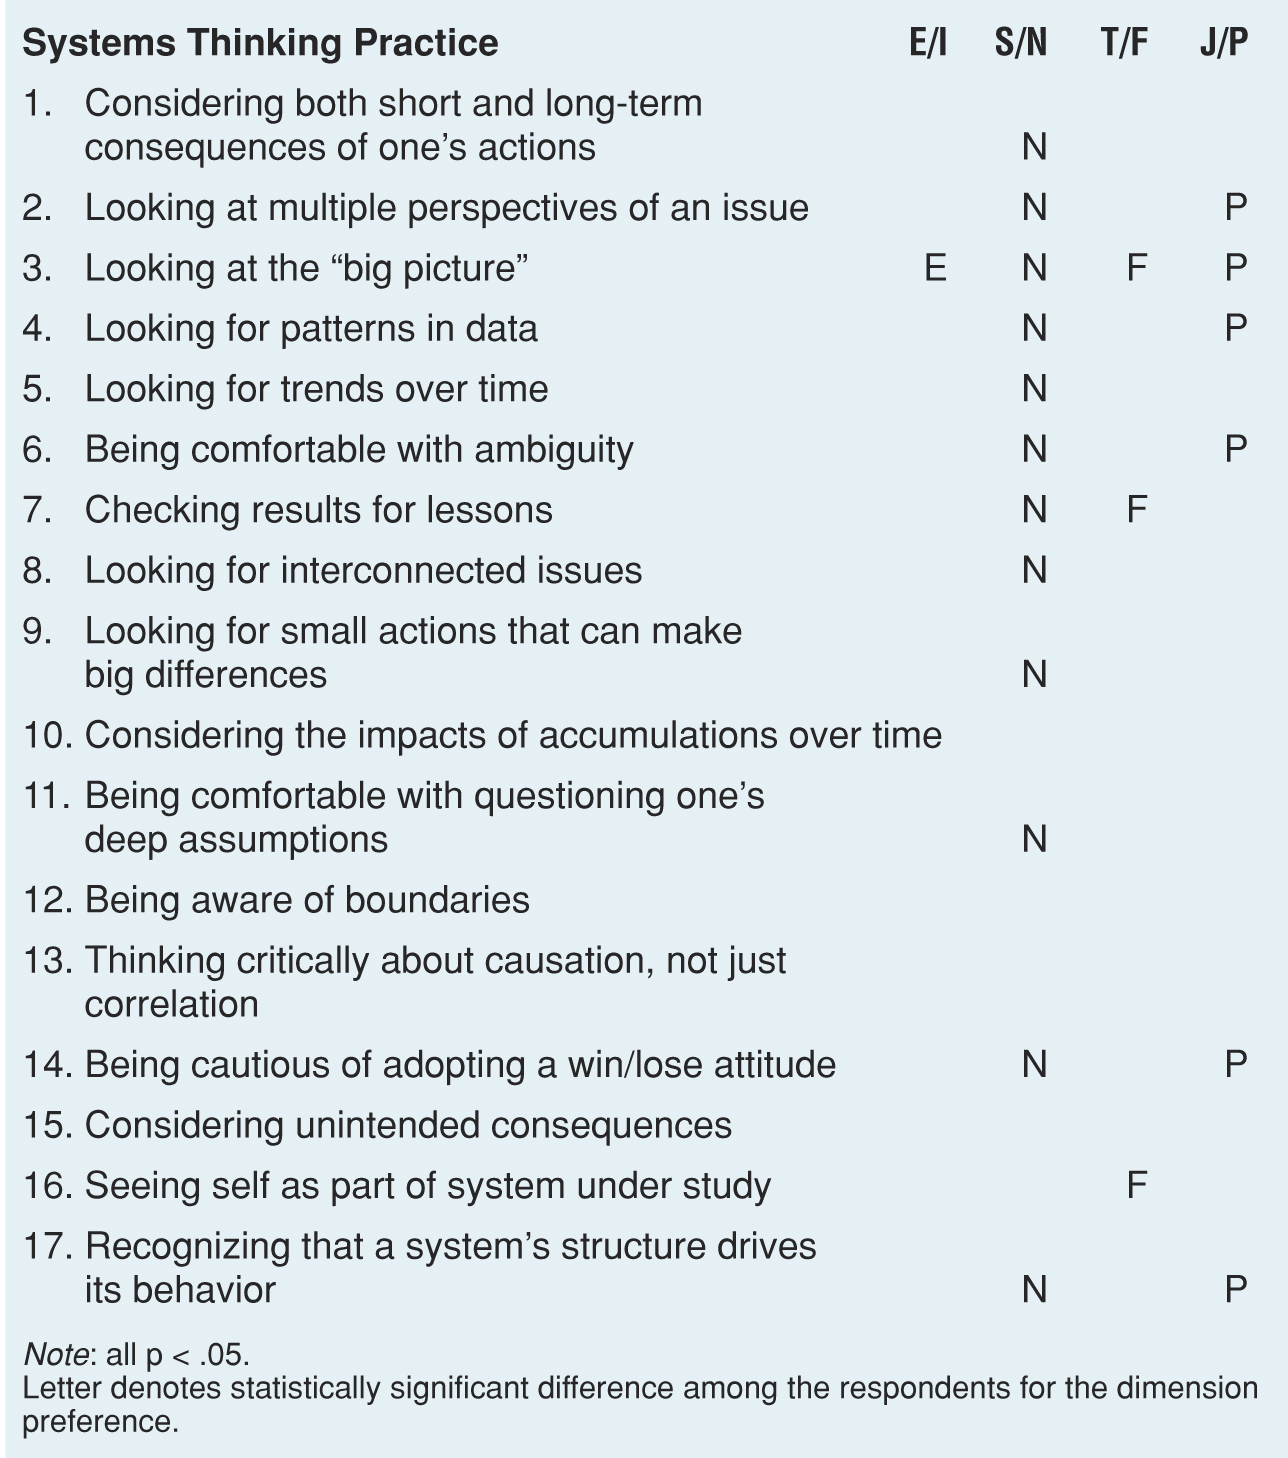 STATISTICALLY SIGNIFICANT PREFERENCES FOR SYSTEMS THINKING PRACTICES, BY MBTI DIMENSION